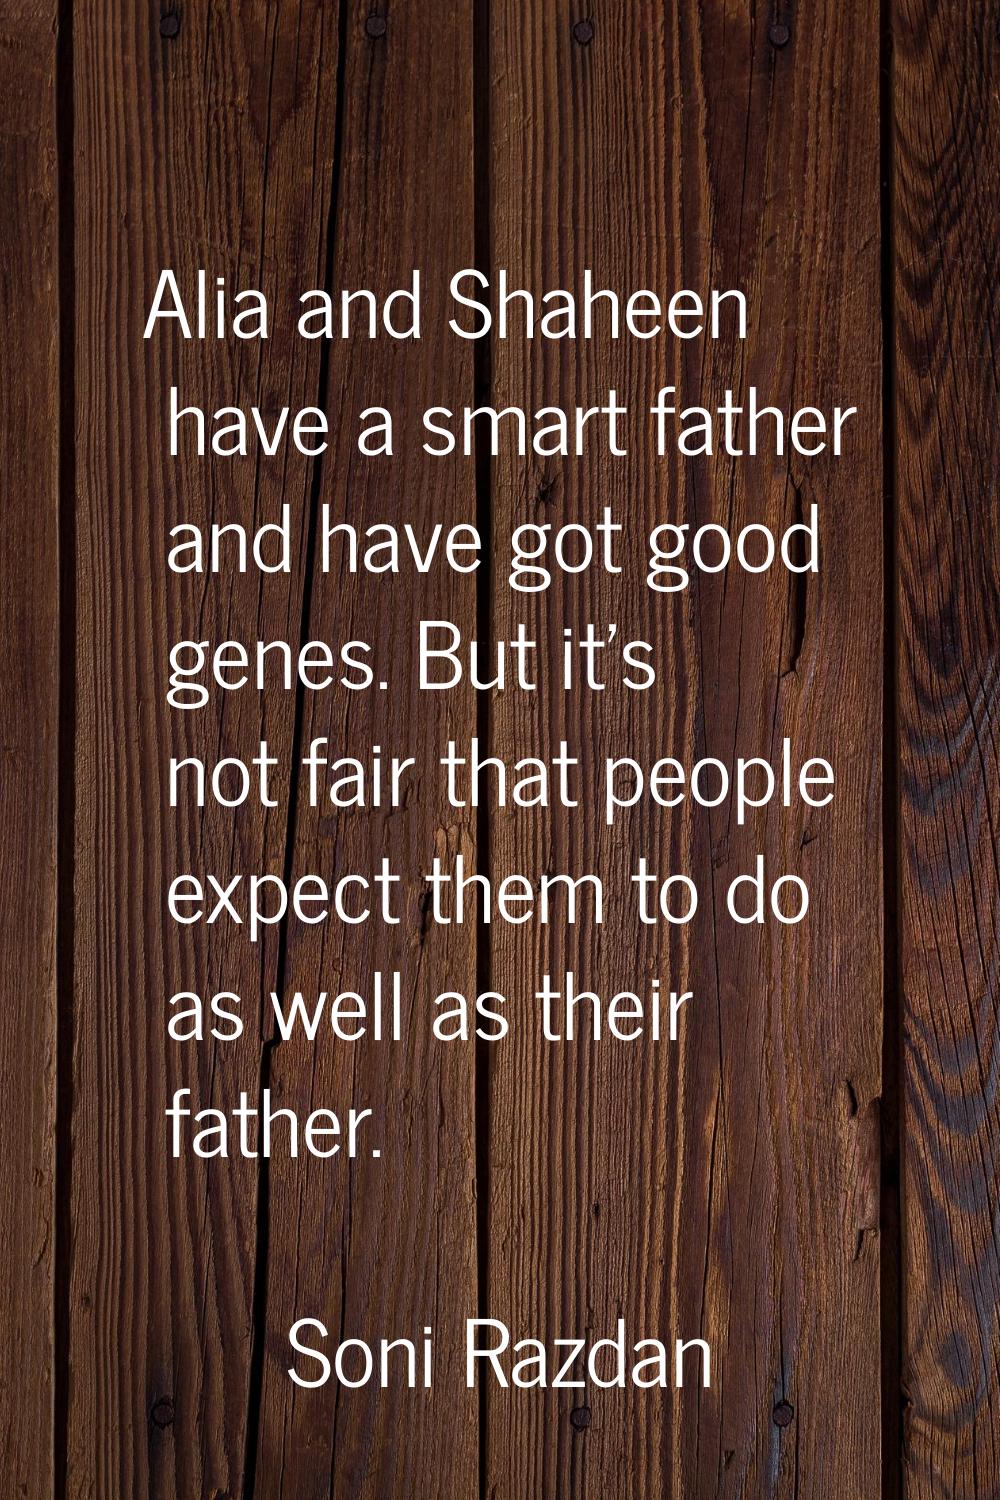 Alia and Shaheen have a smart father and have got good genes. But it's not fair that people expect 